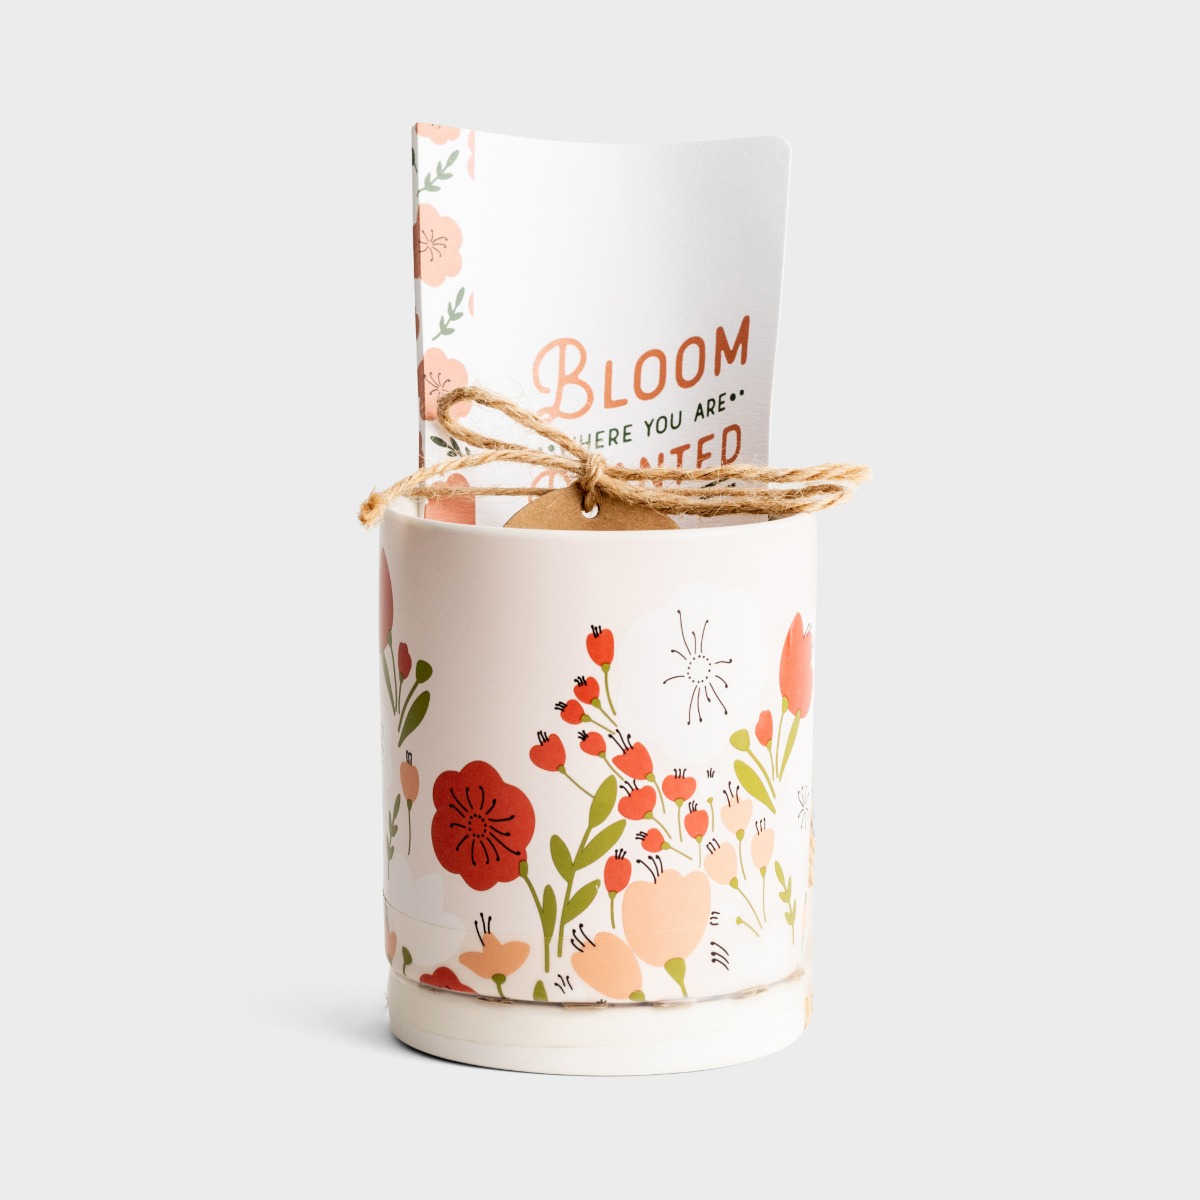 Bloom Where You Are Planted - Planter & Journal Gift Set